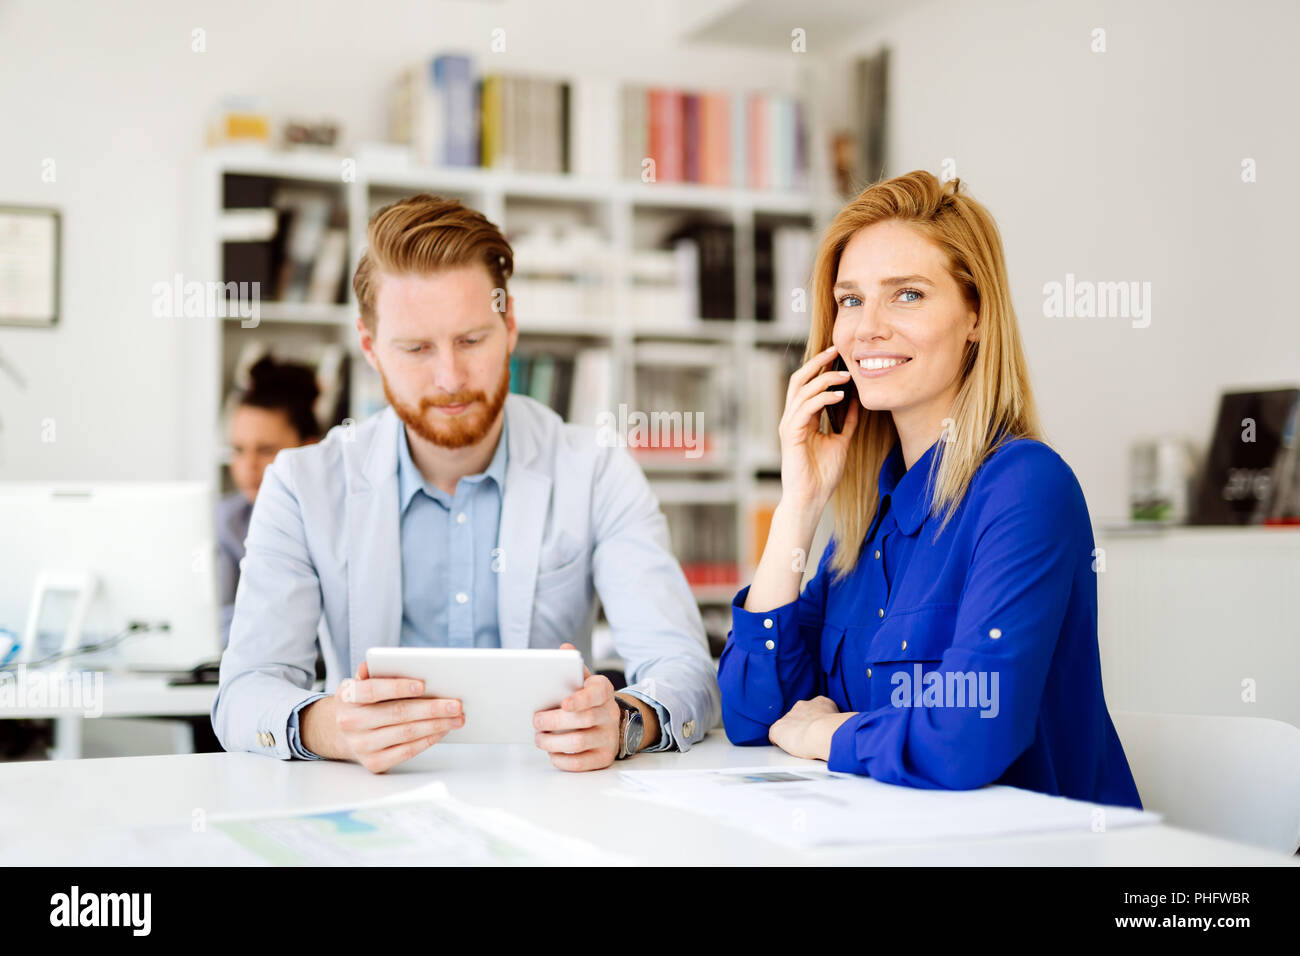 Confident company ceo at meeting Stock Photo